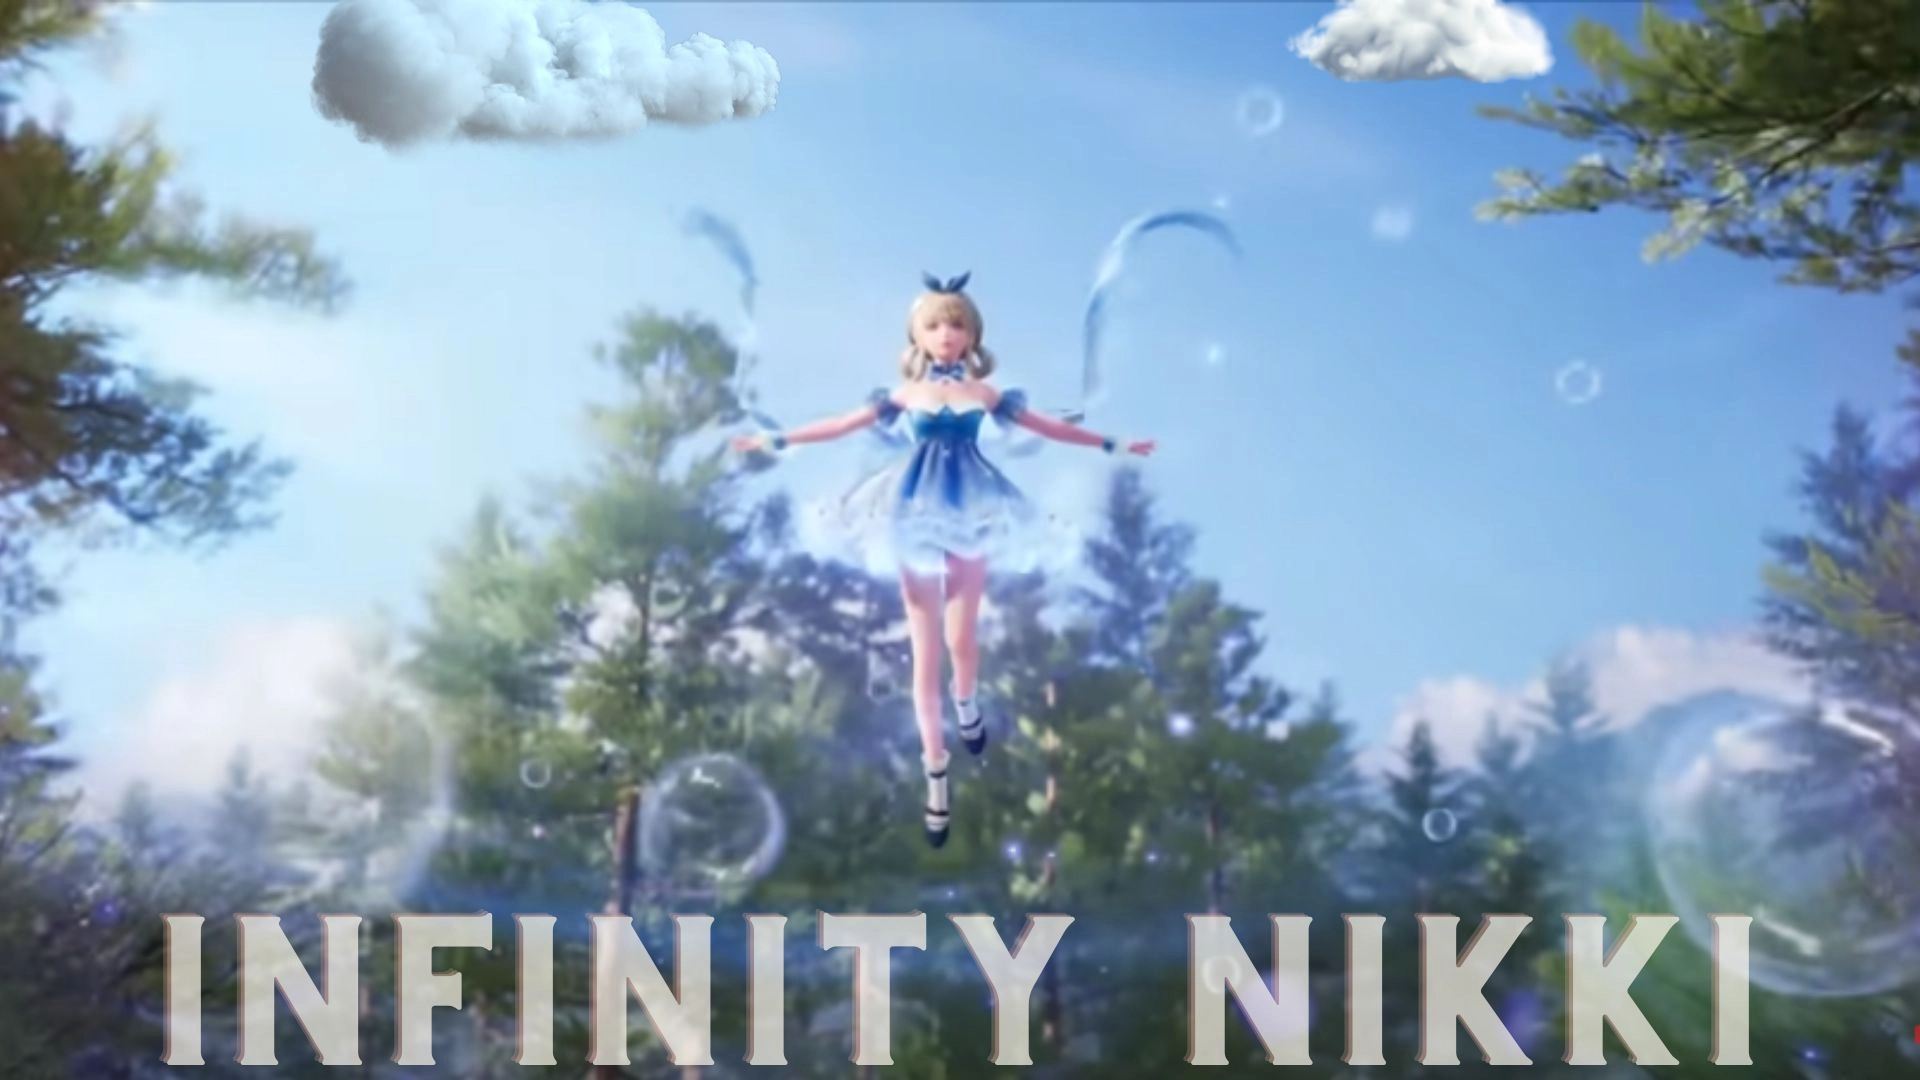 Infinity Nikki Parents Guide and Age Rating (2022)